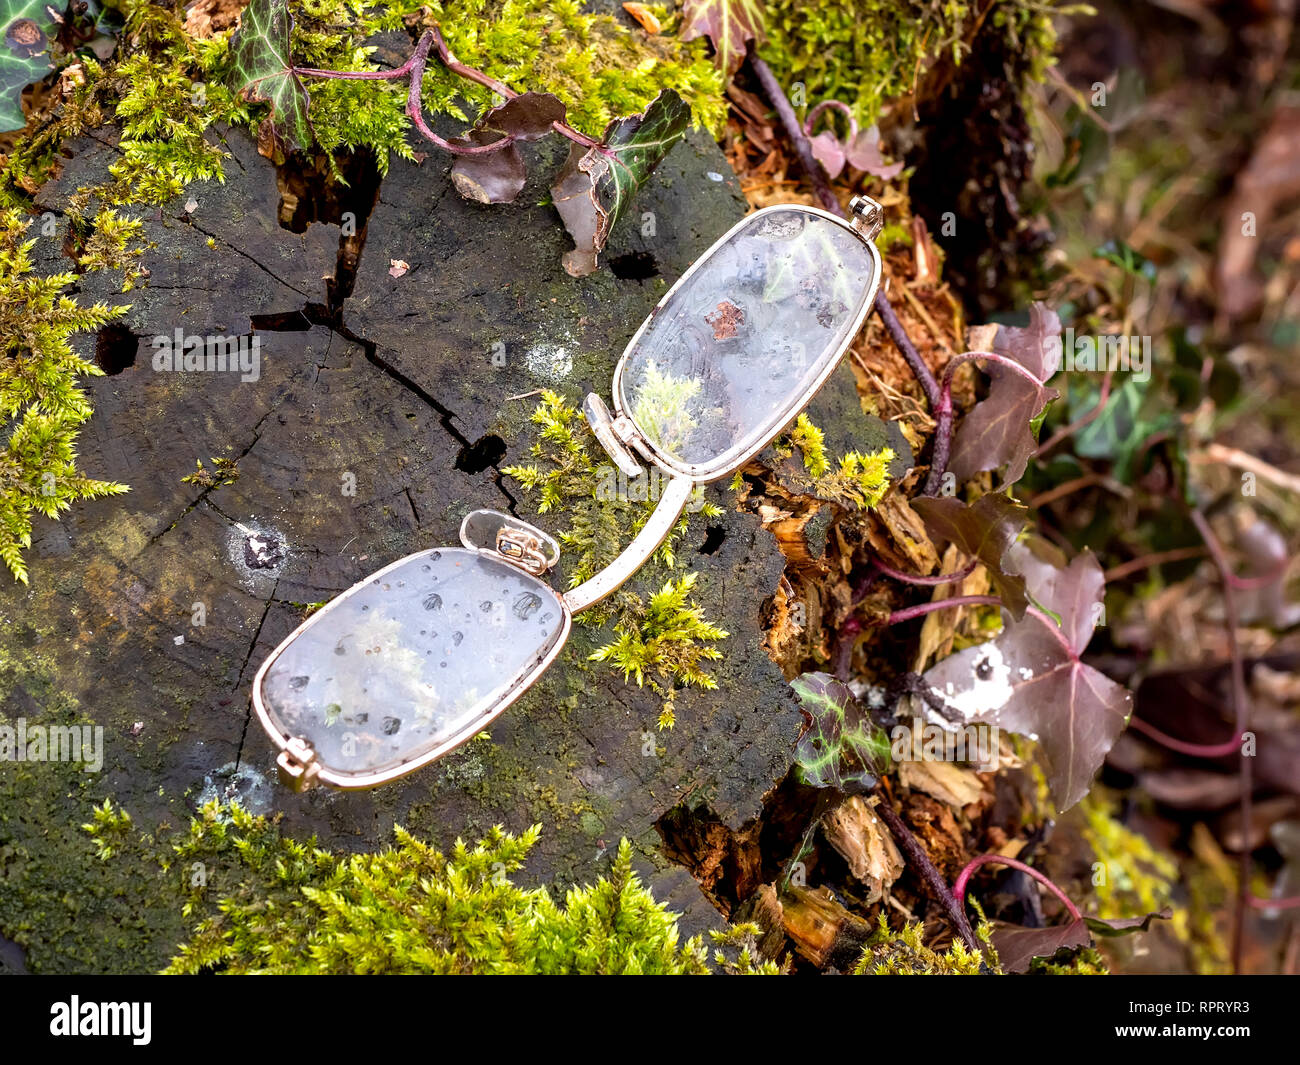 Broken spectacle glasses on a tree trunk. Stock Photo